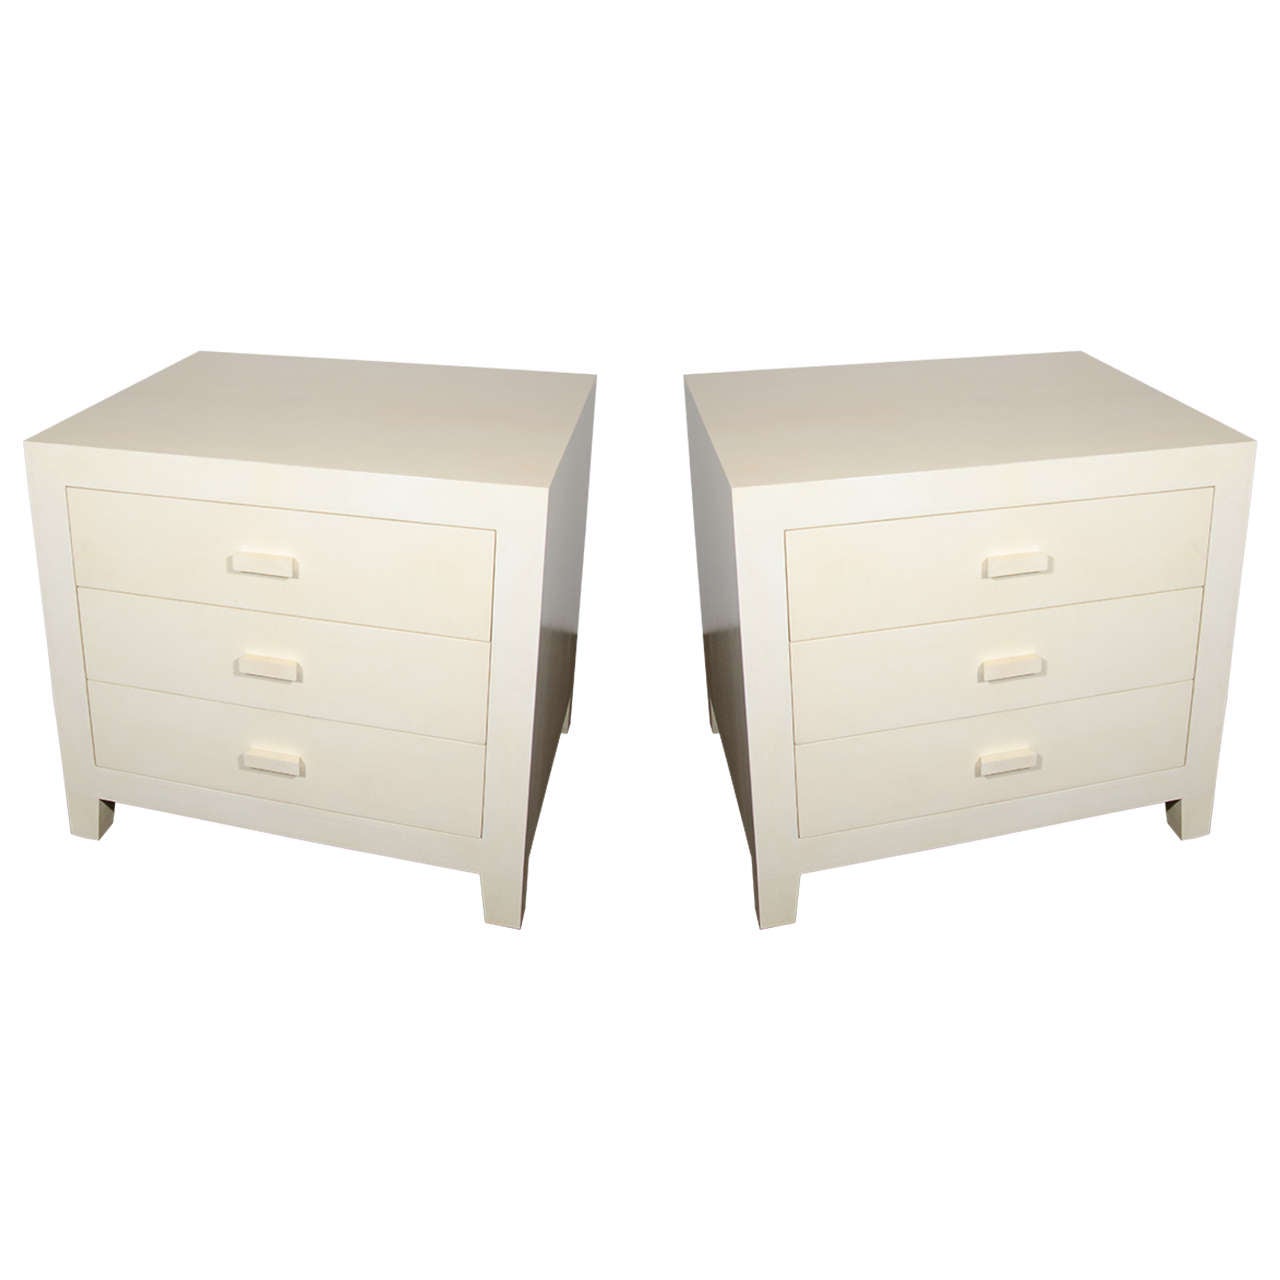 Pair of Ivory Parchment End Tables or Night Stands